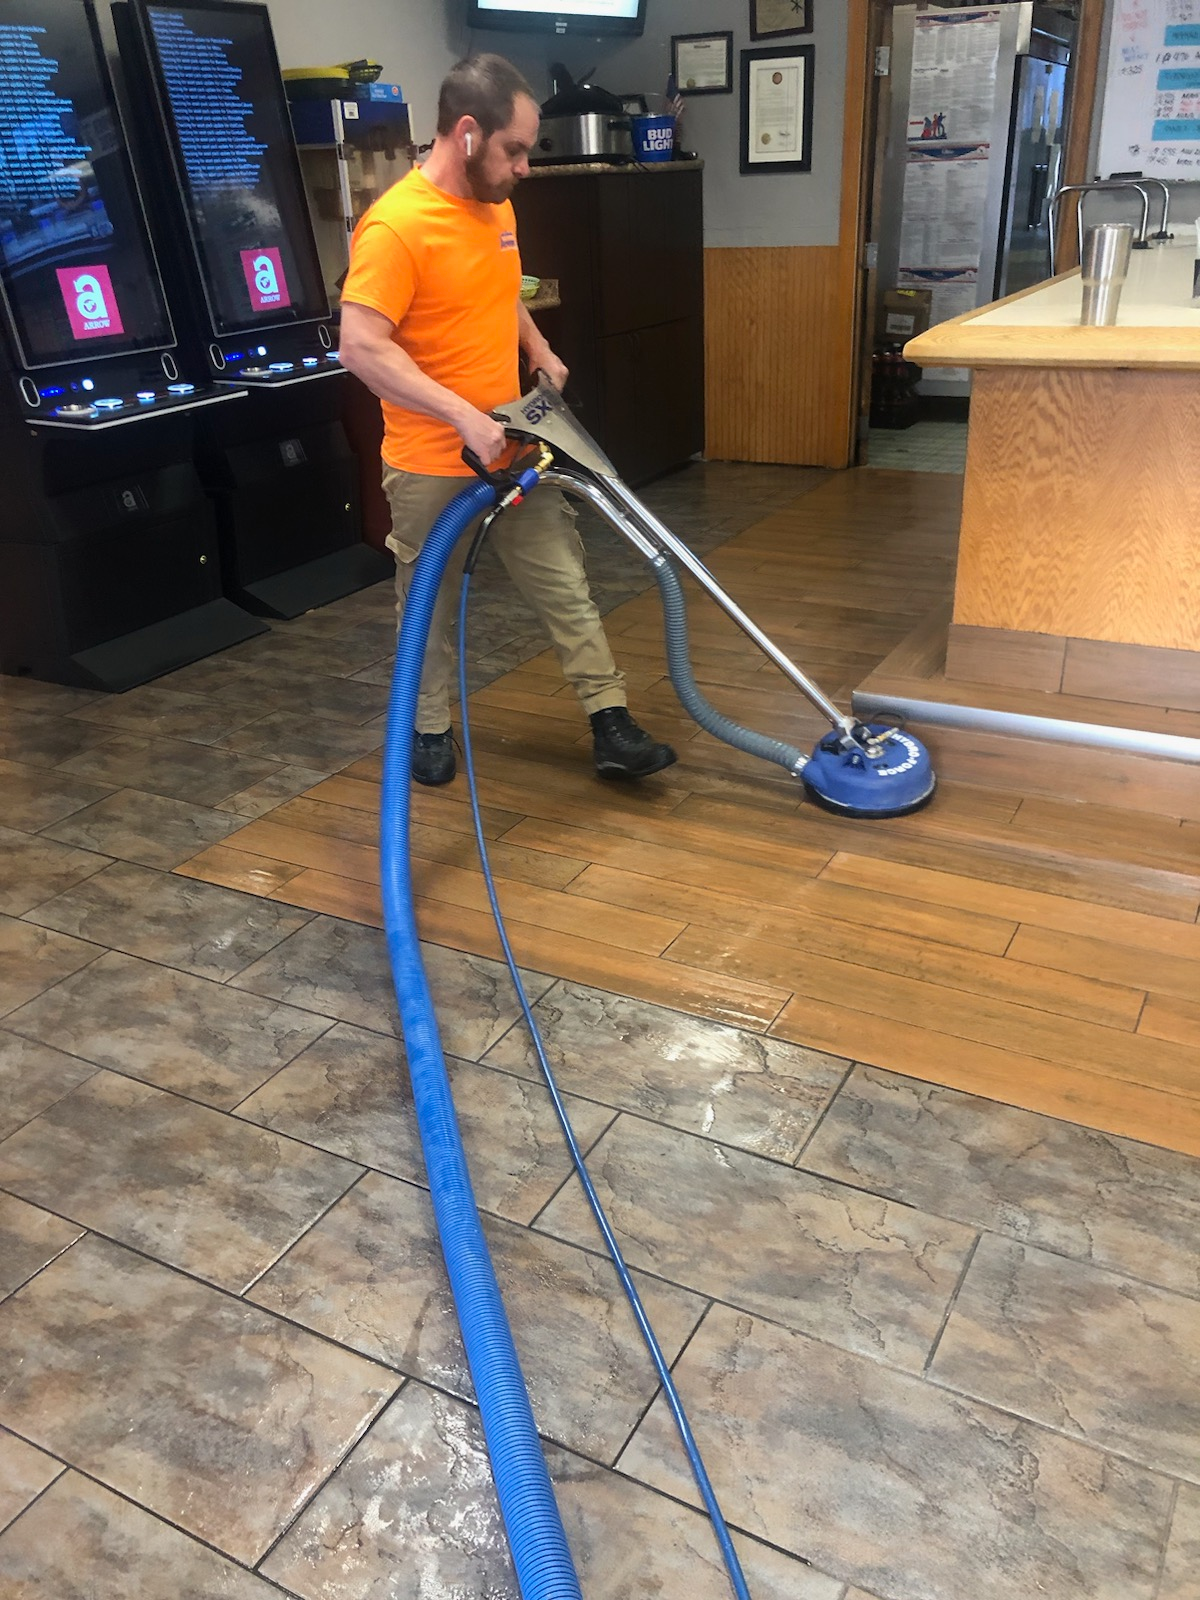 A man in an orange shirt is using a vacuum cleaner on a tiled floor